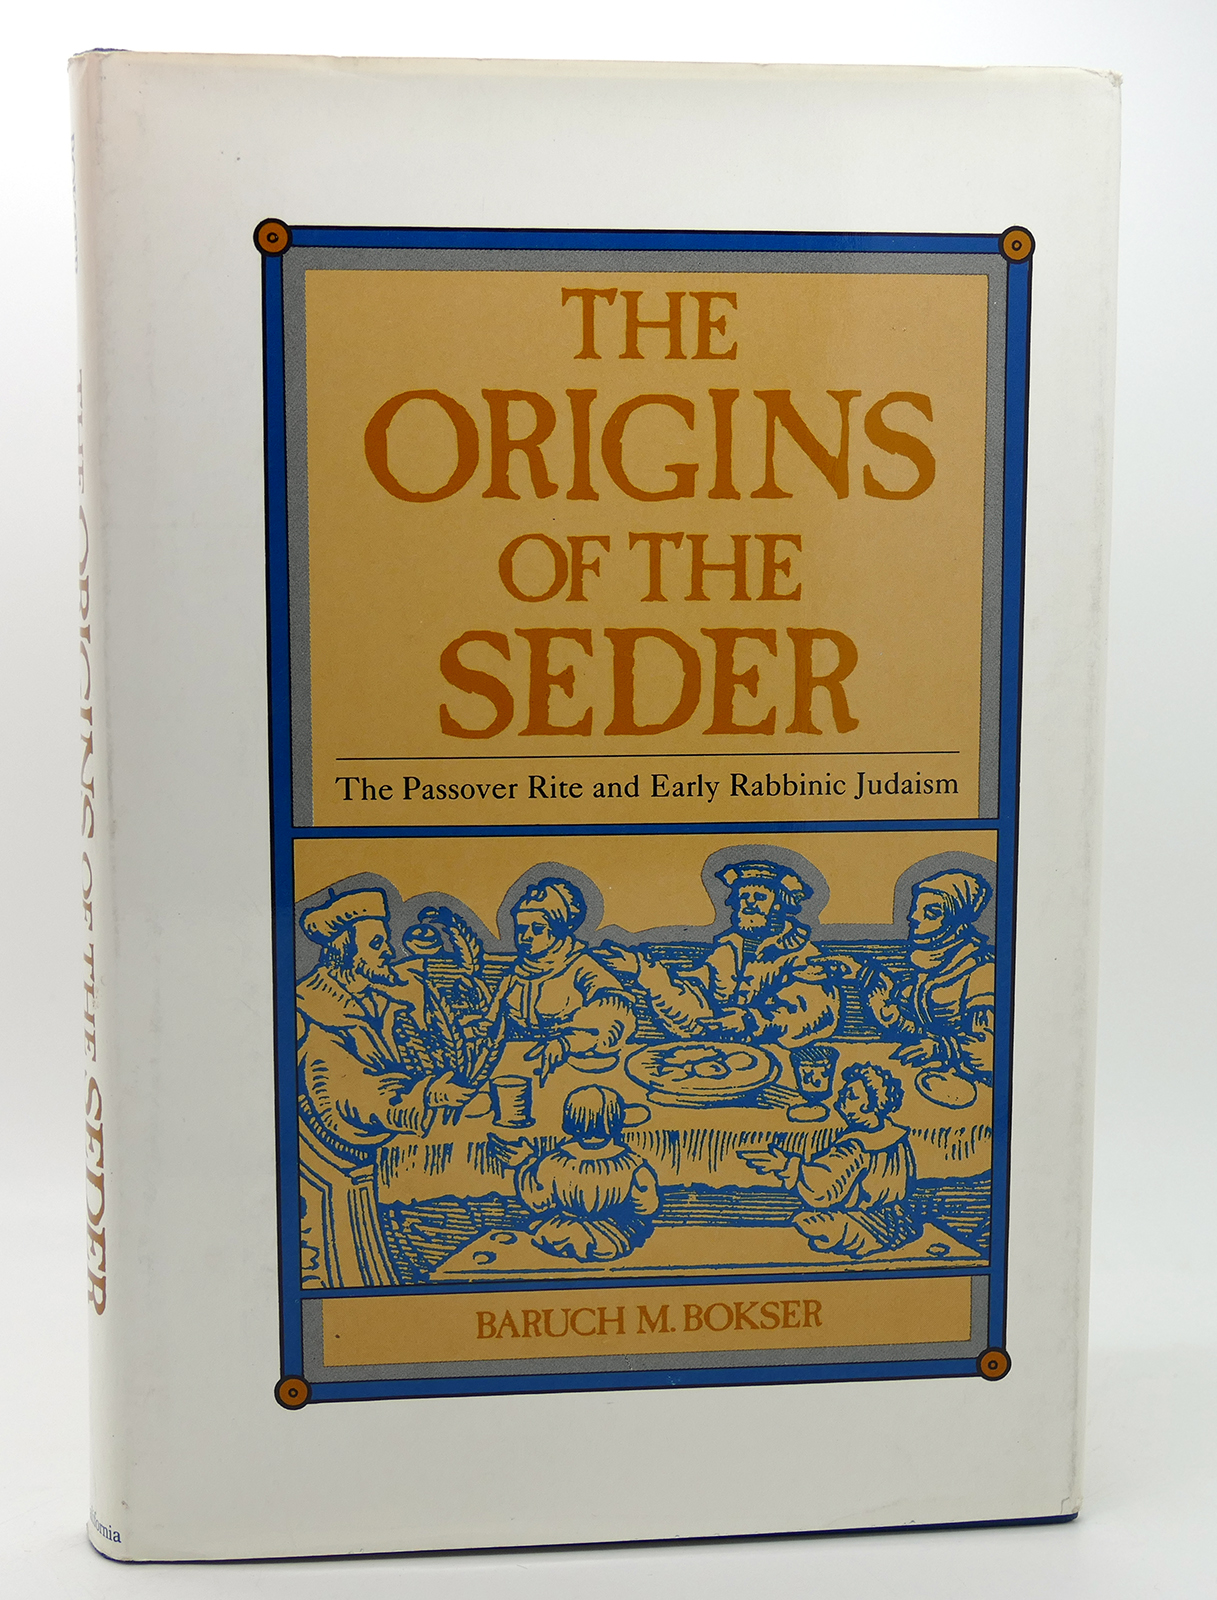 ORIGINS OF SEDER The Passover Rite and Early Rabbinic Judaism - Baruch M. Bokser